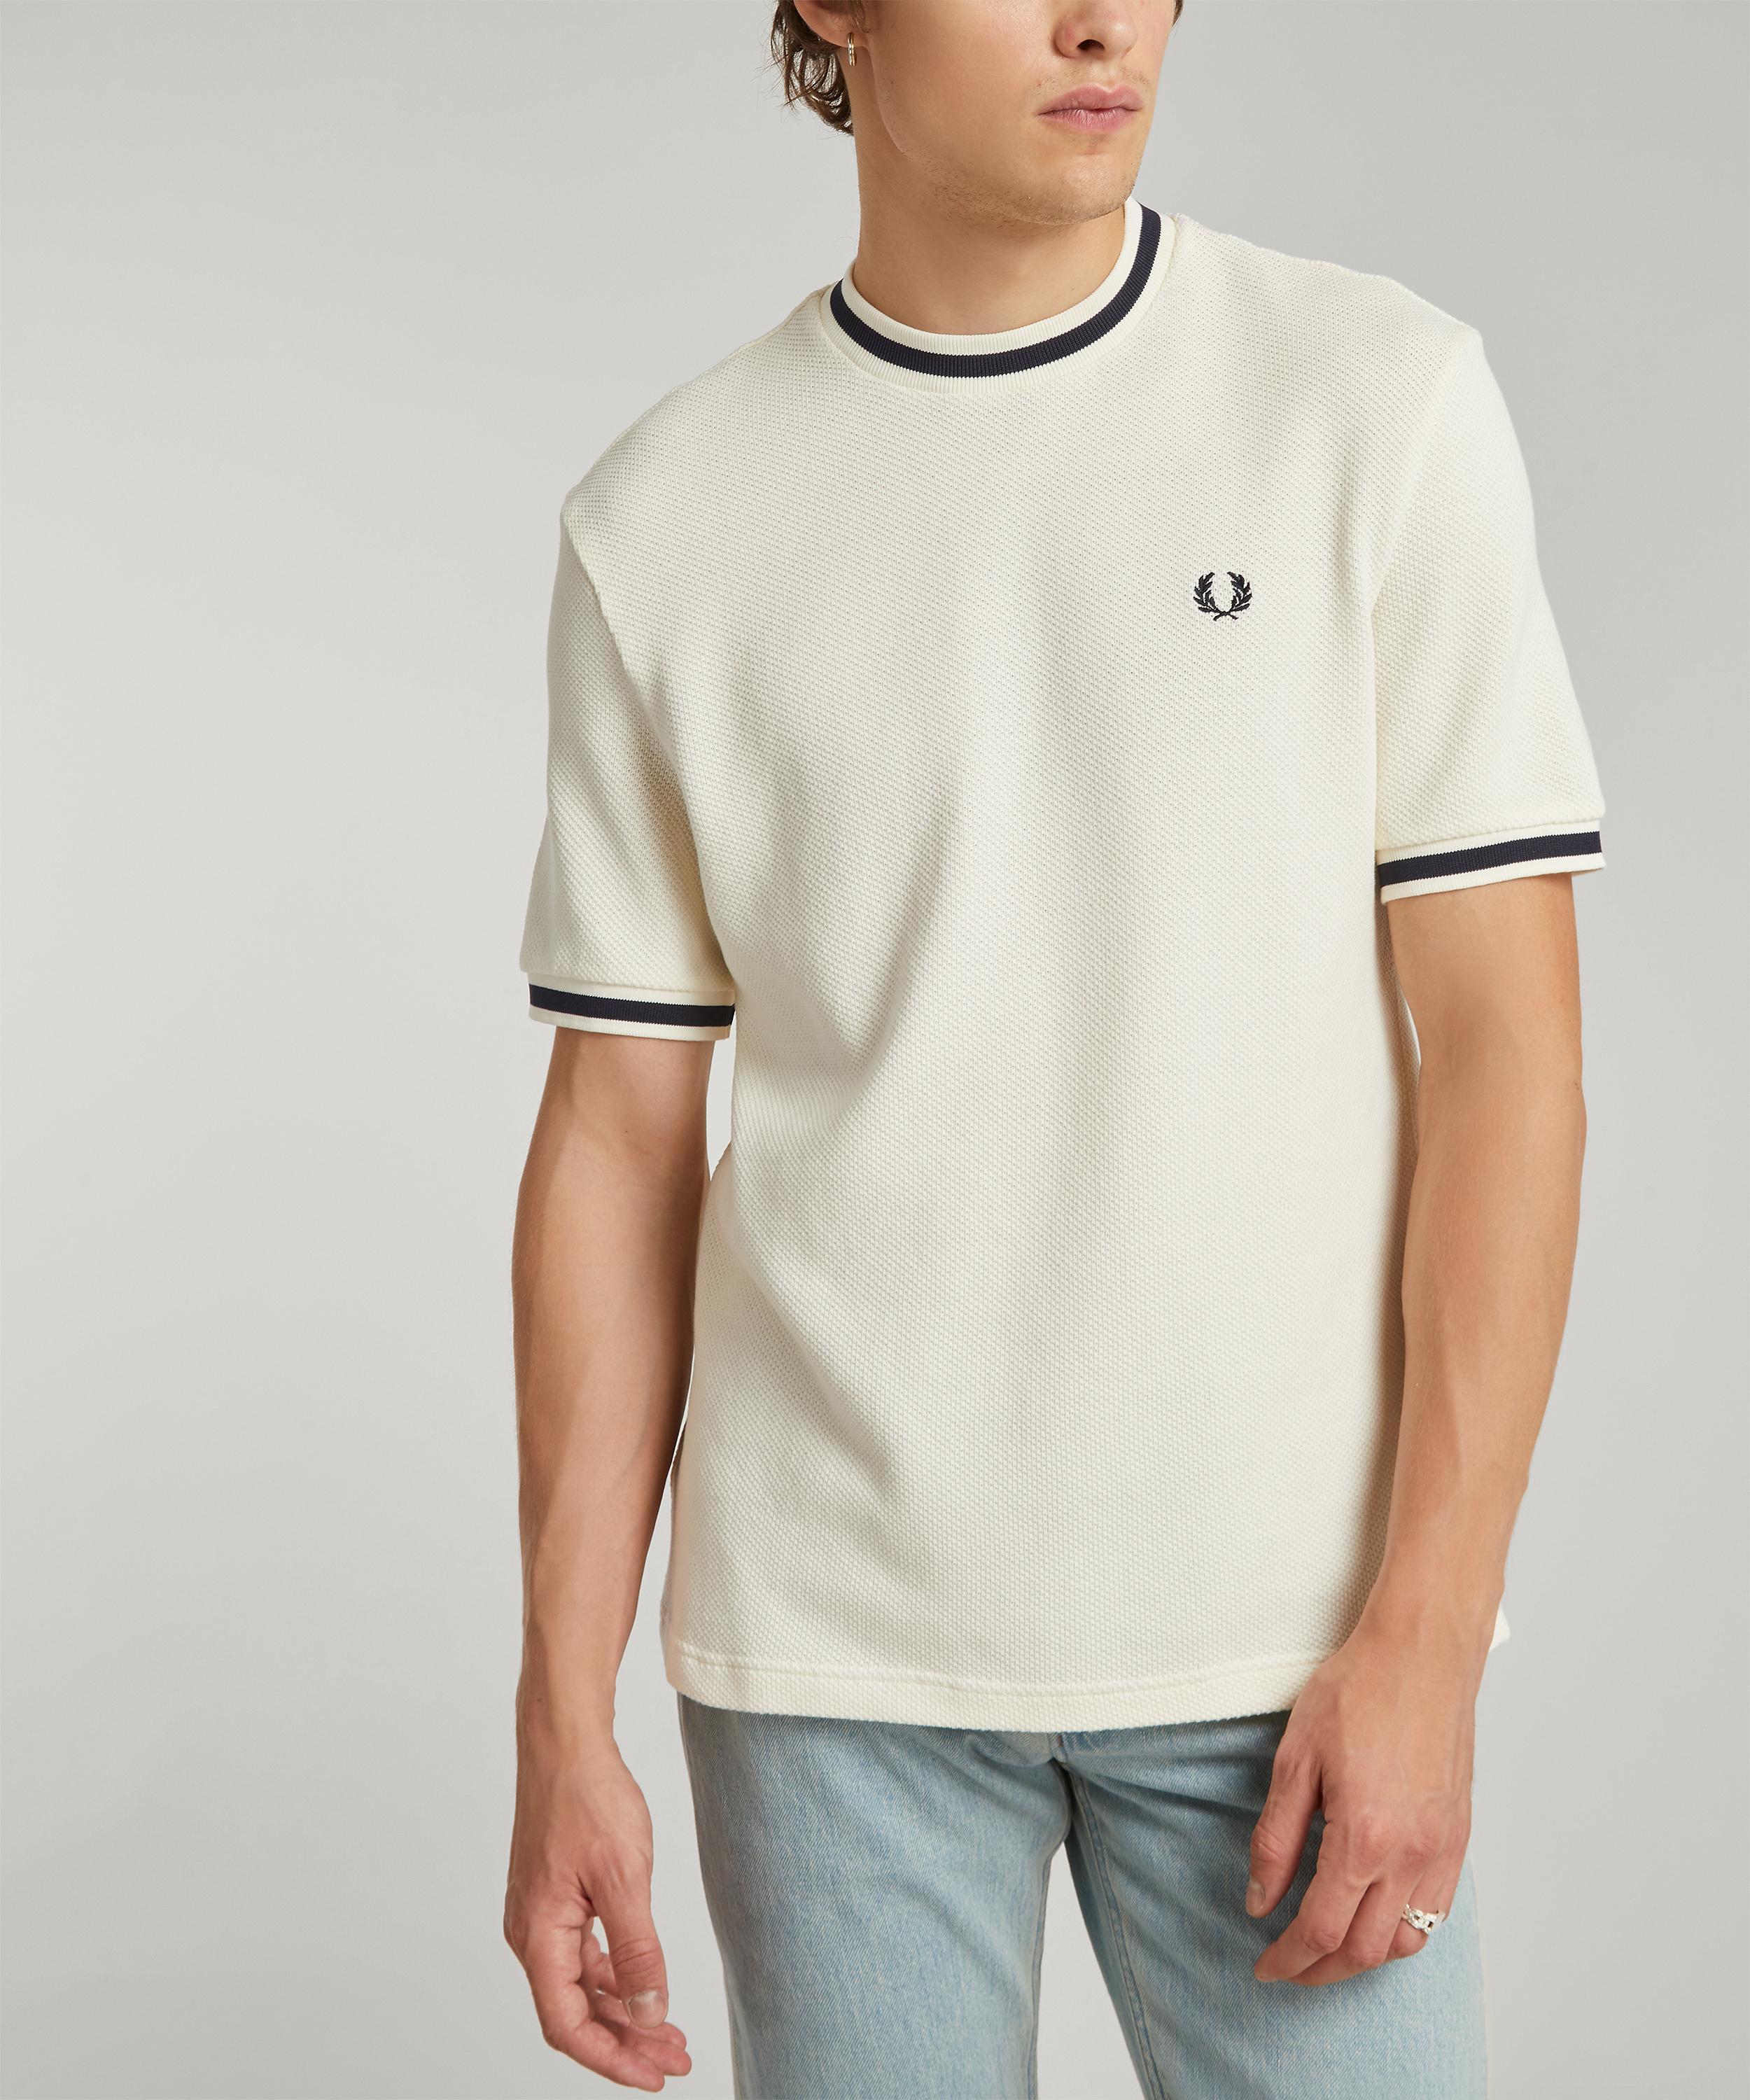 Fred Perry Cotton Textured Piqué T-shirt in Natural for Men - Lyst